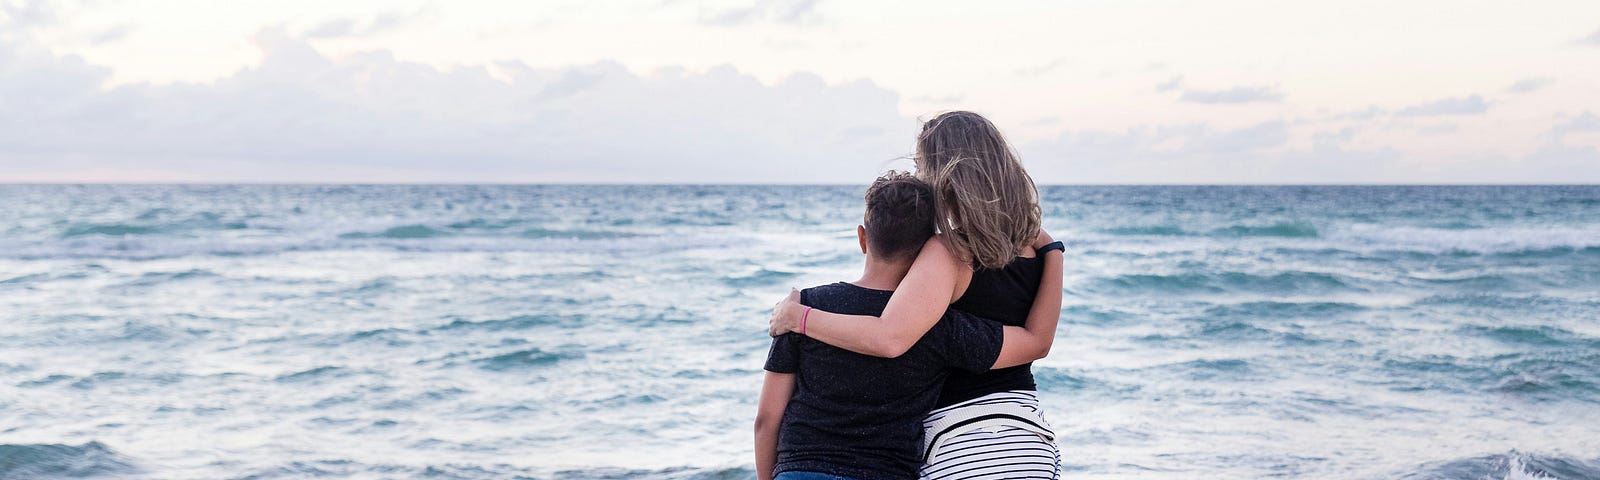 An image of a mother and son hugging standing on a beach and looking out to sea